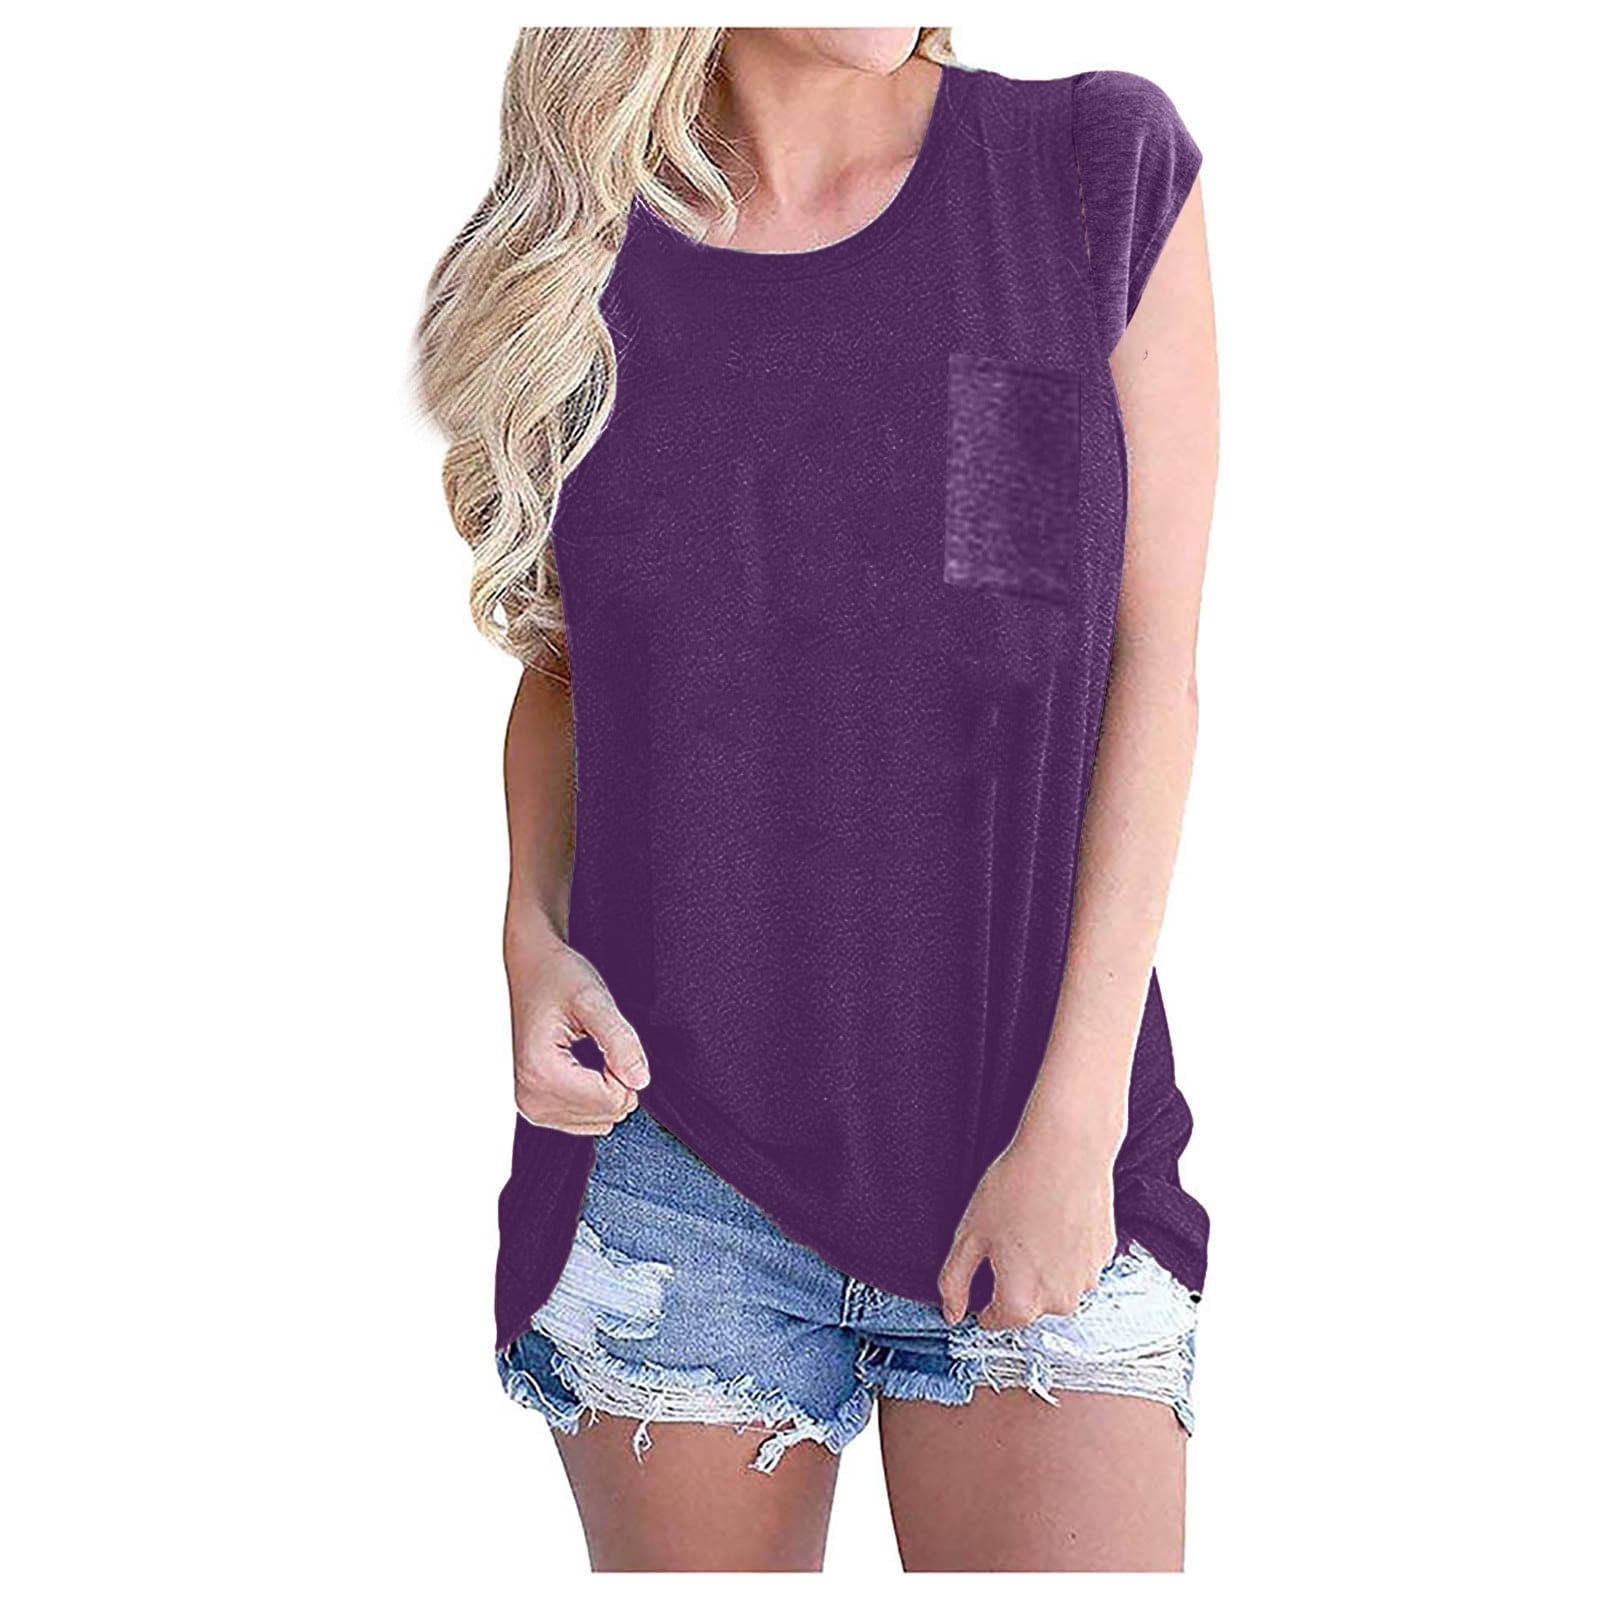 Fashion Blouse Clothes L6Nv4o@A Girls Short Sleeve Lavender Purple Solid Color T-Shirts XS-XL